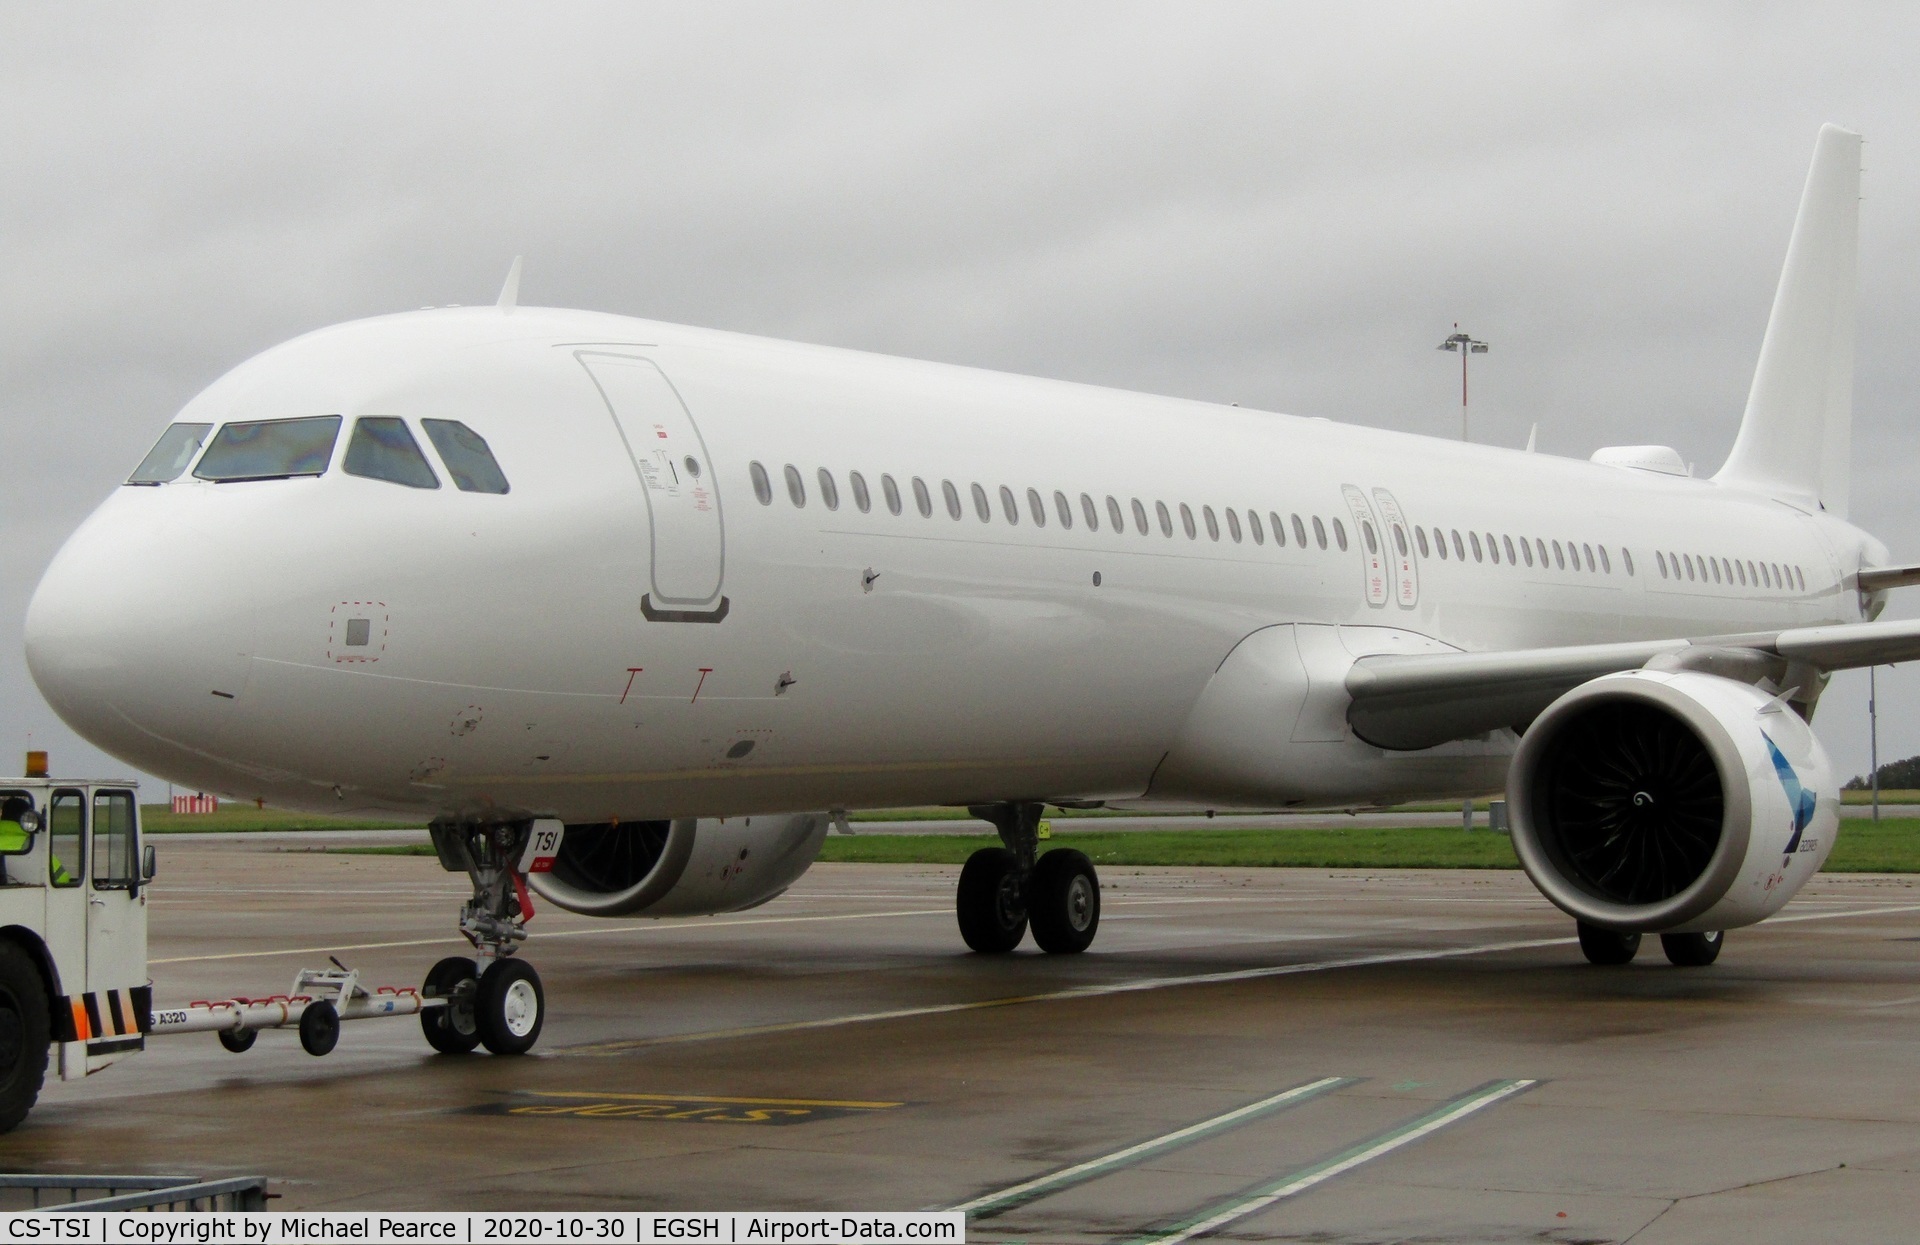 CS-TSI, 2020 Airbus A321-253NX C/N 10074, Parked on Stand 5 after arrival from Hamburg (XFW) for paintwork.